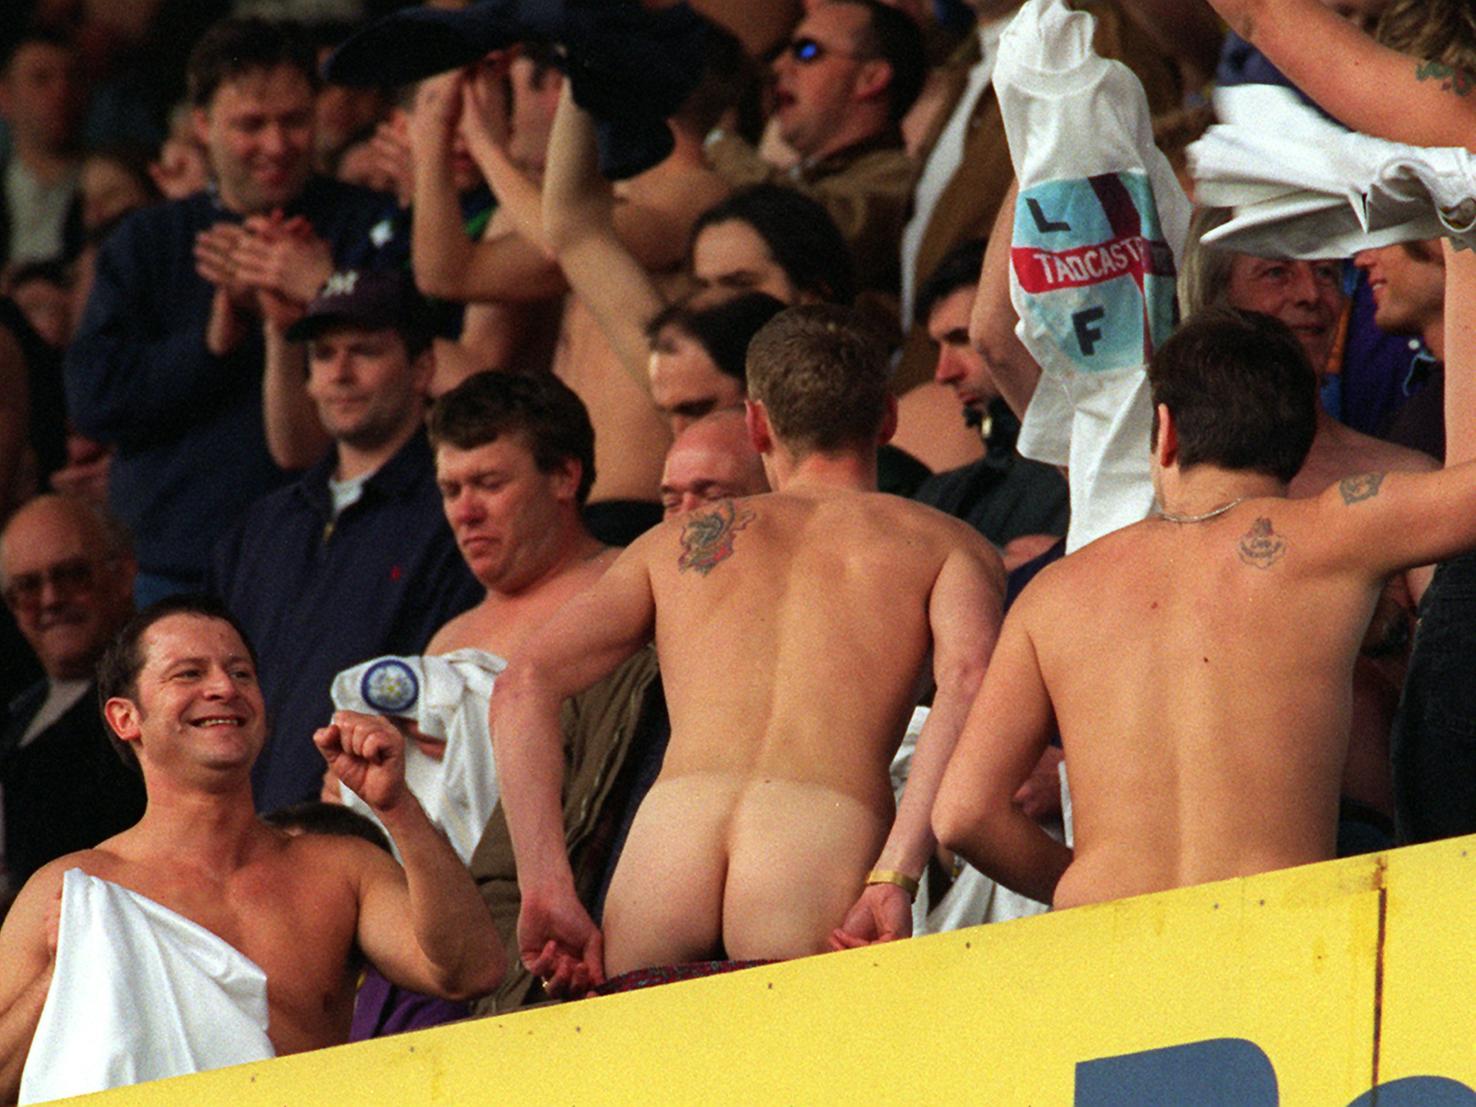 Cheeky! These Leeds United fans bared all at half time against Sheffield Wednesday at Hillsborough in March 1997. The game finished 2-2 with Lee Sharpe and Rod Wallace scoring for the Whites.